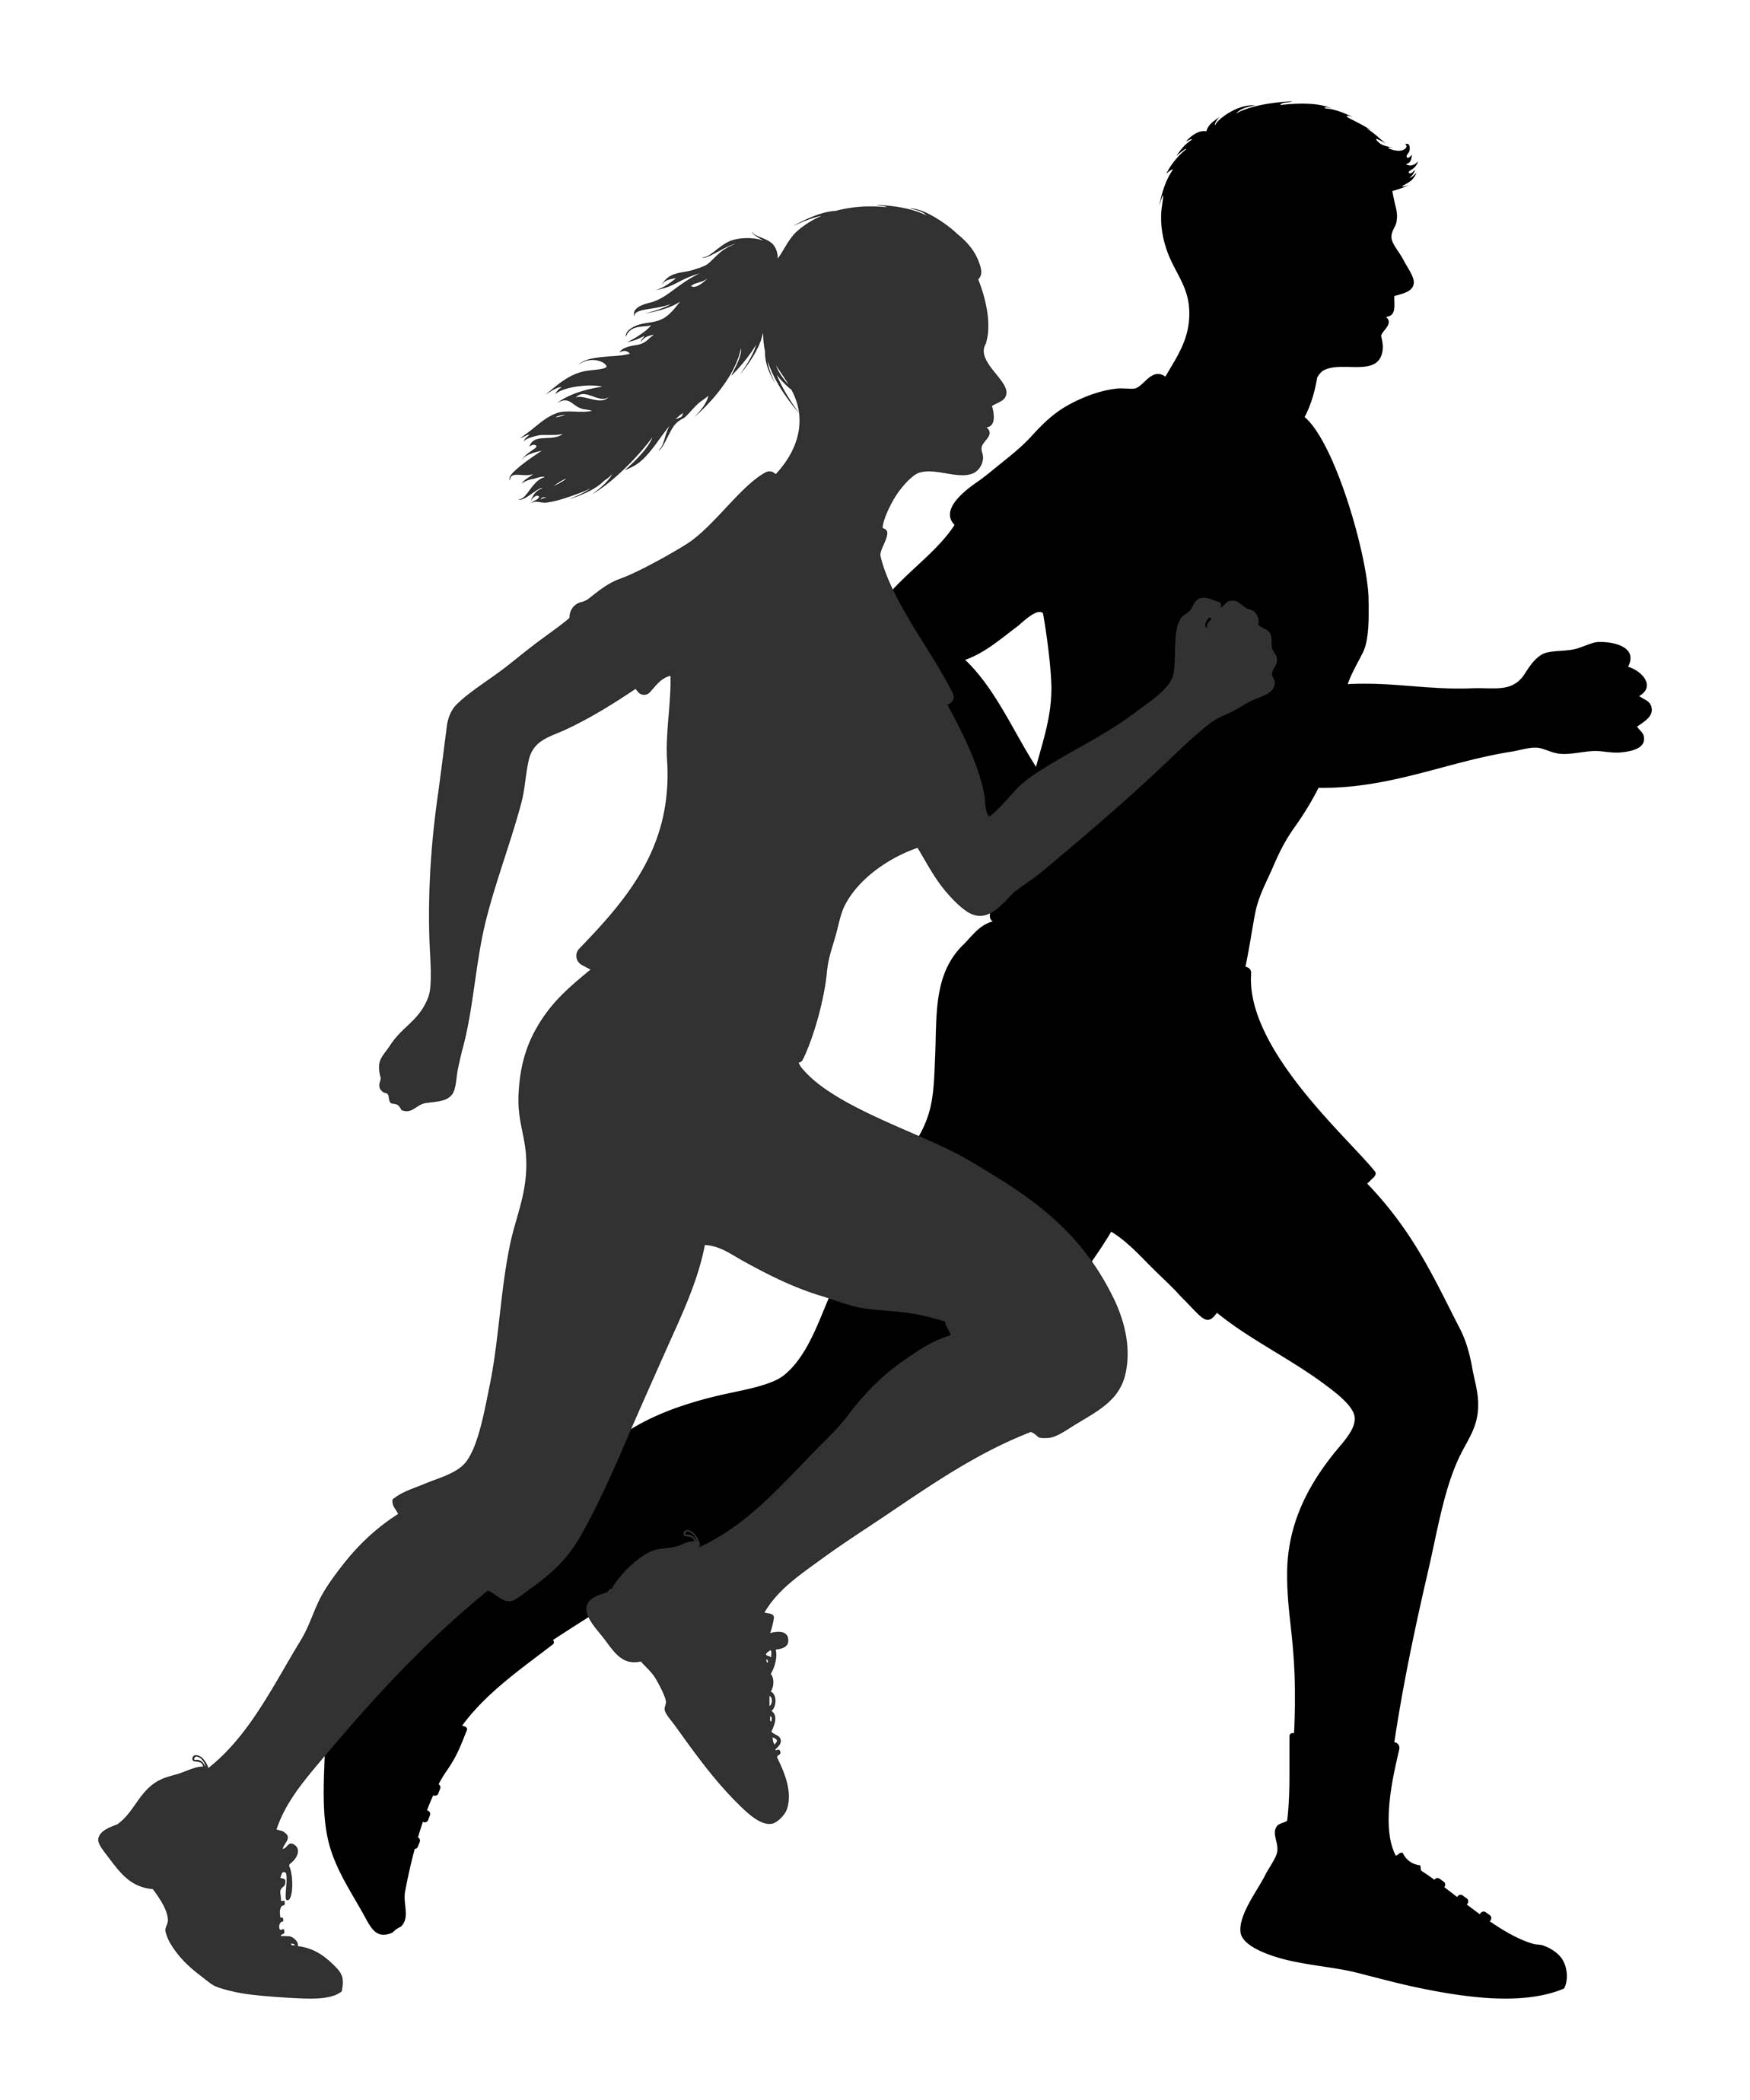 Graphic of two silhouettes running